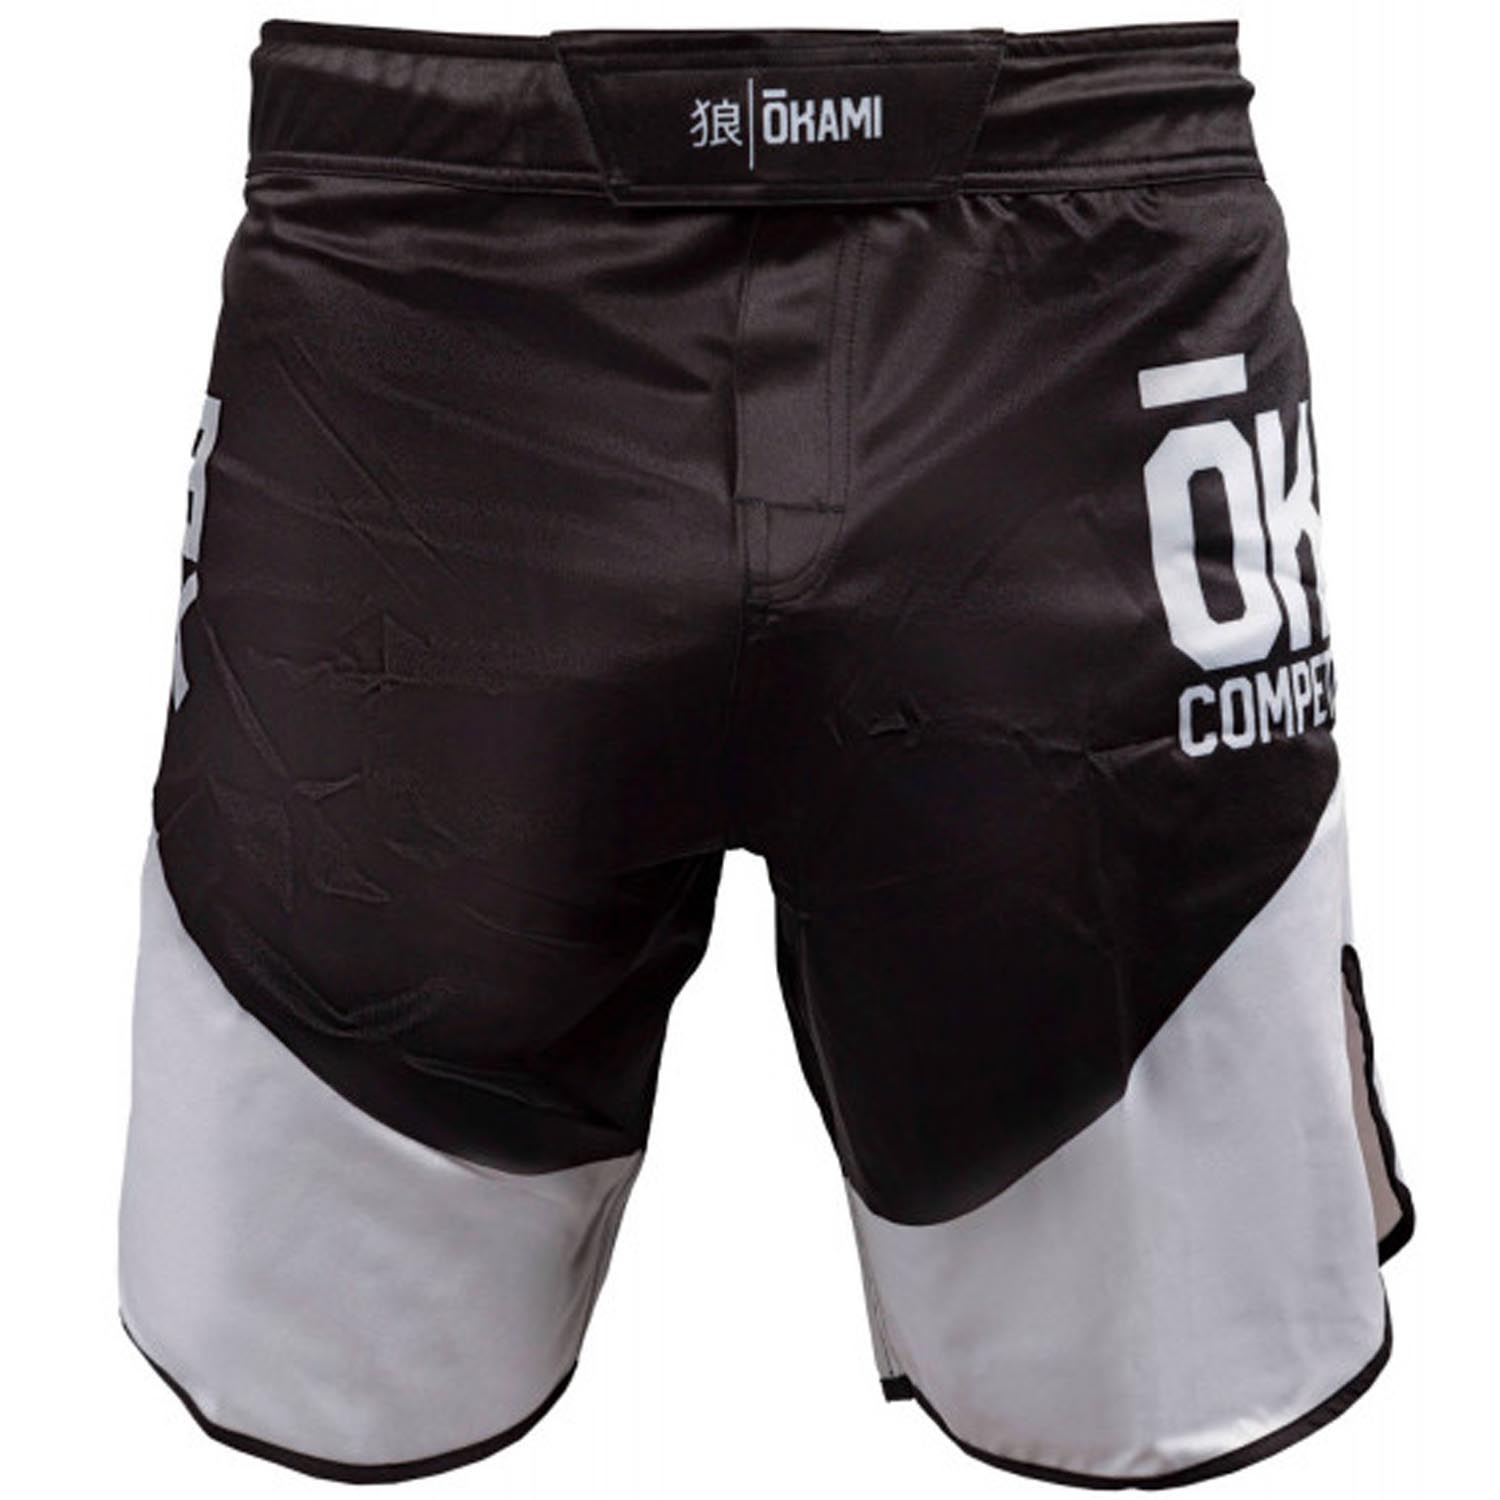 OKAMI MMA Fight Shorts, Competition Team, white, XS